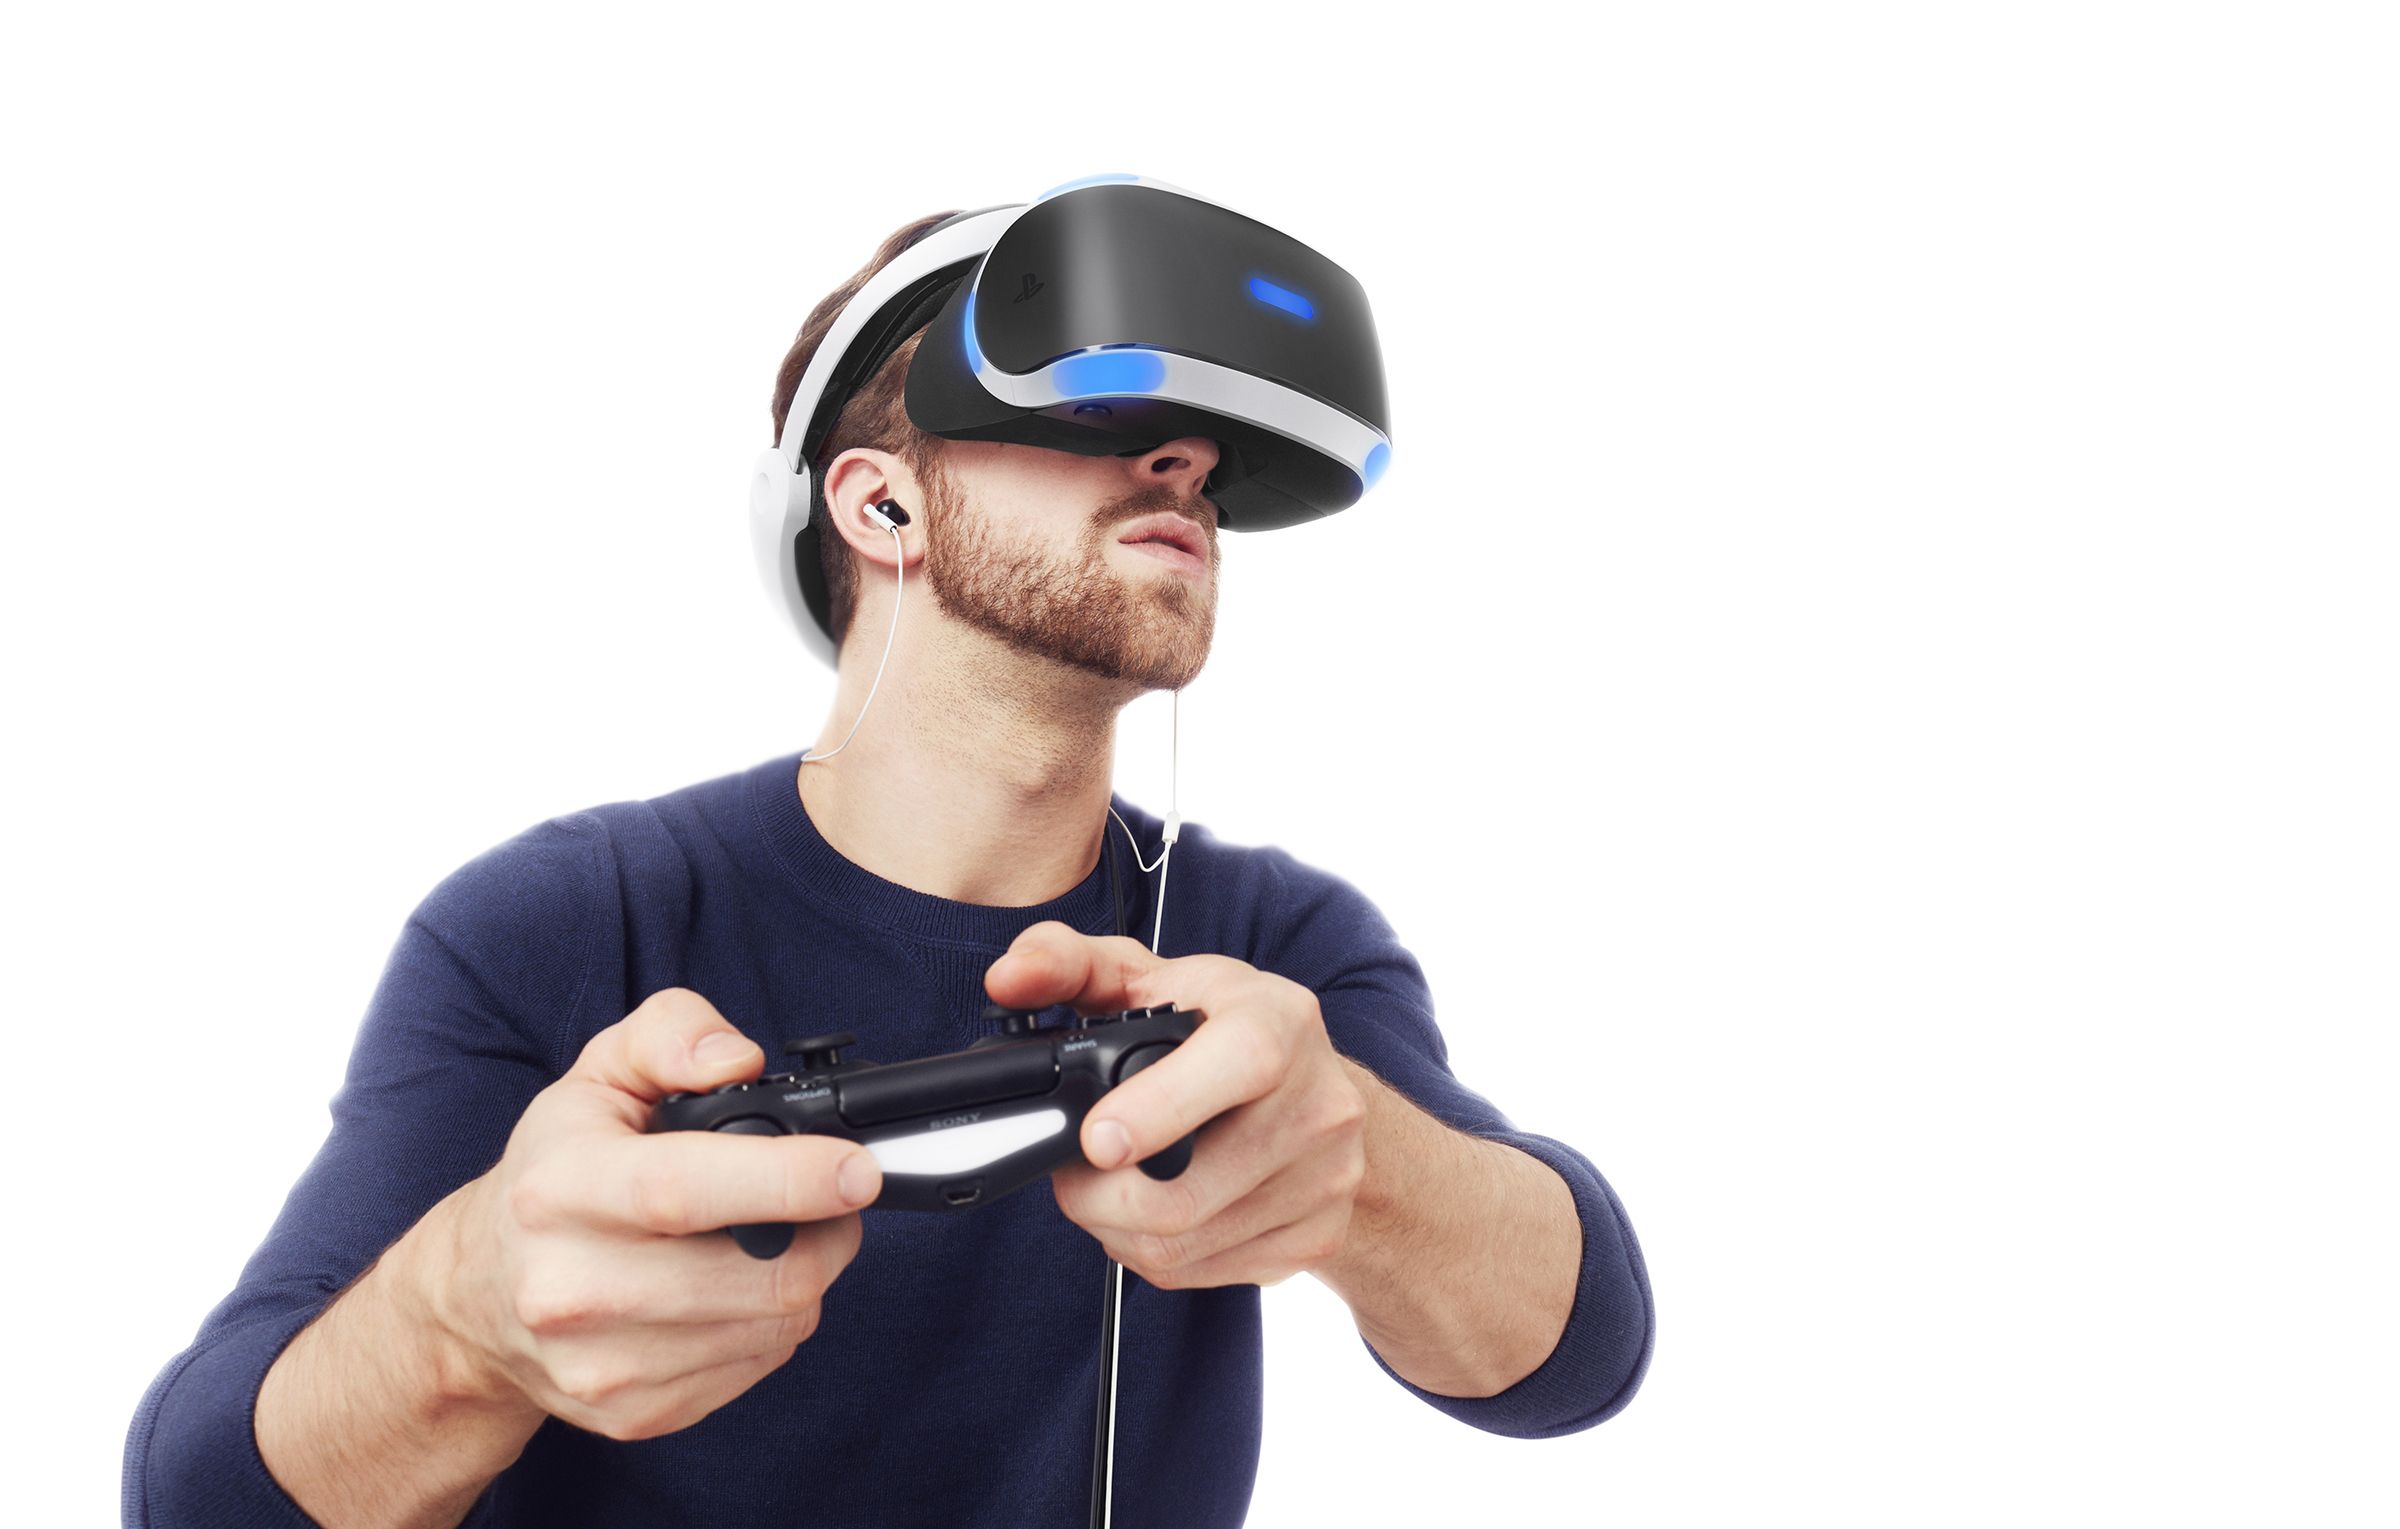 PlayStation VR price, release date, games and everything you need